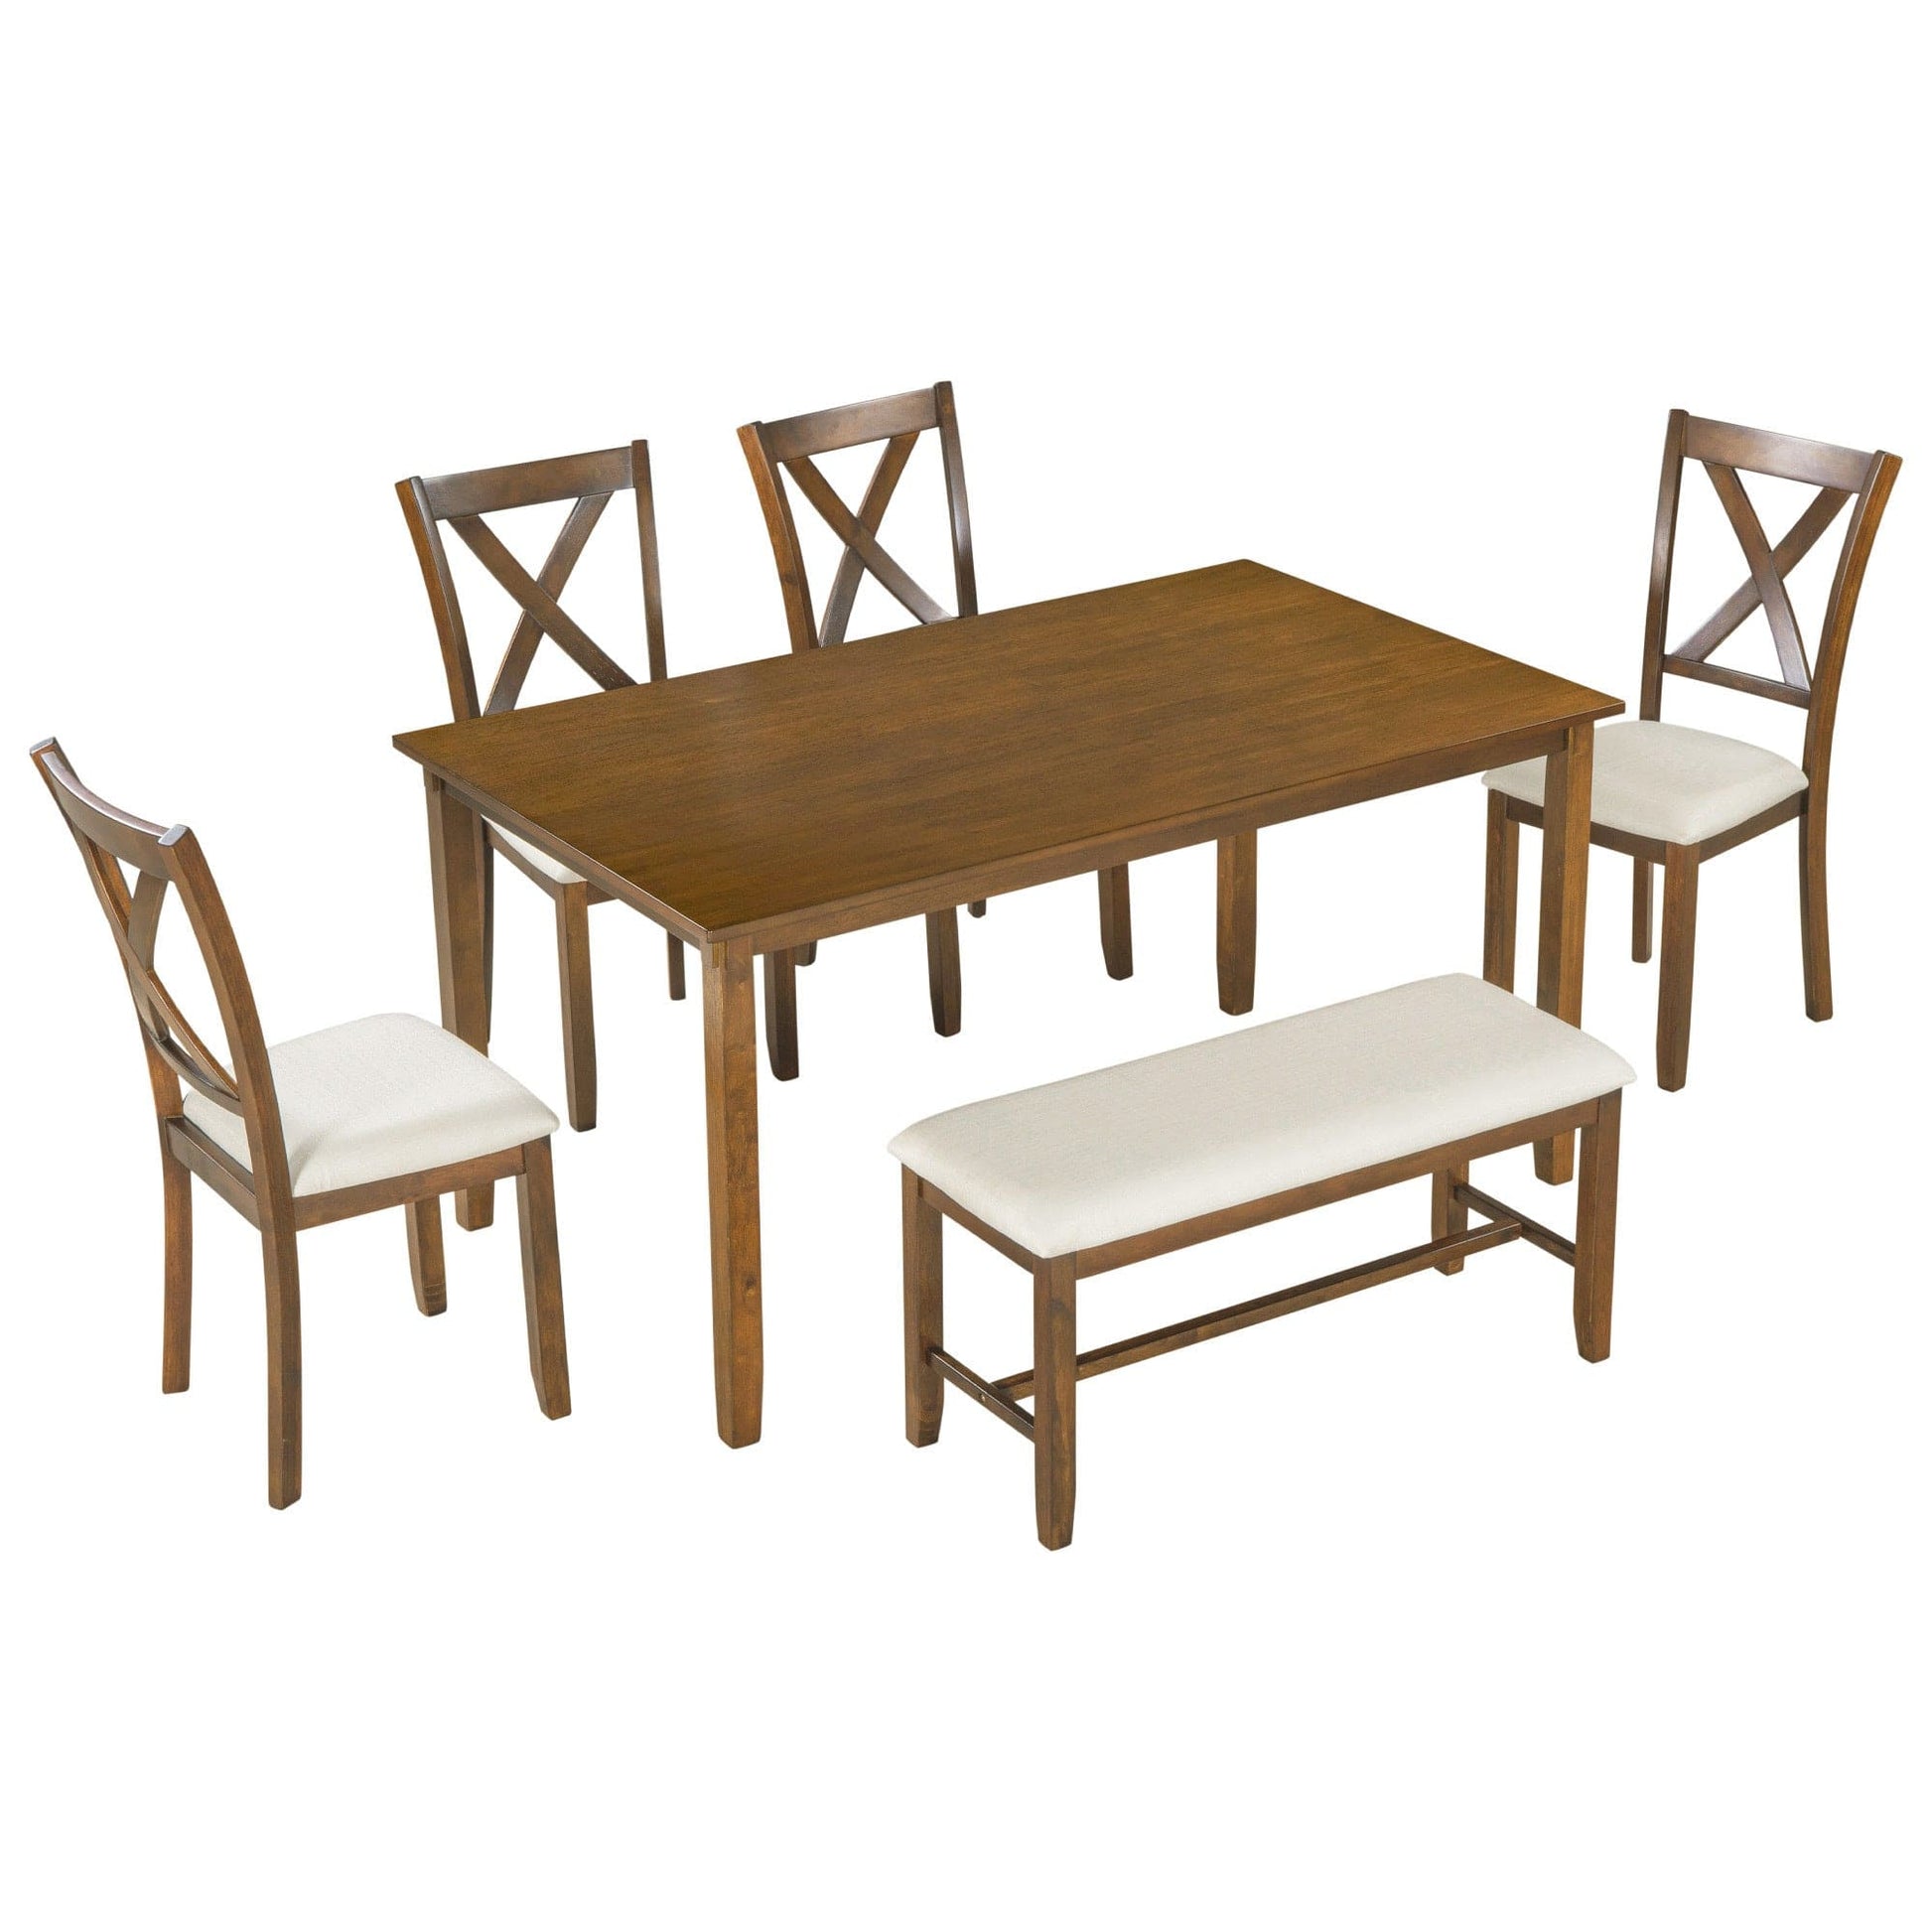 1st Choice Furniture Direct Dining Room Sets 1st Choice 6-Piece Natural Cherry Dining Set with Bench and 4 Chairs